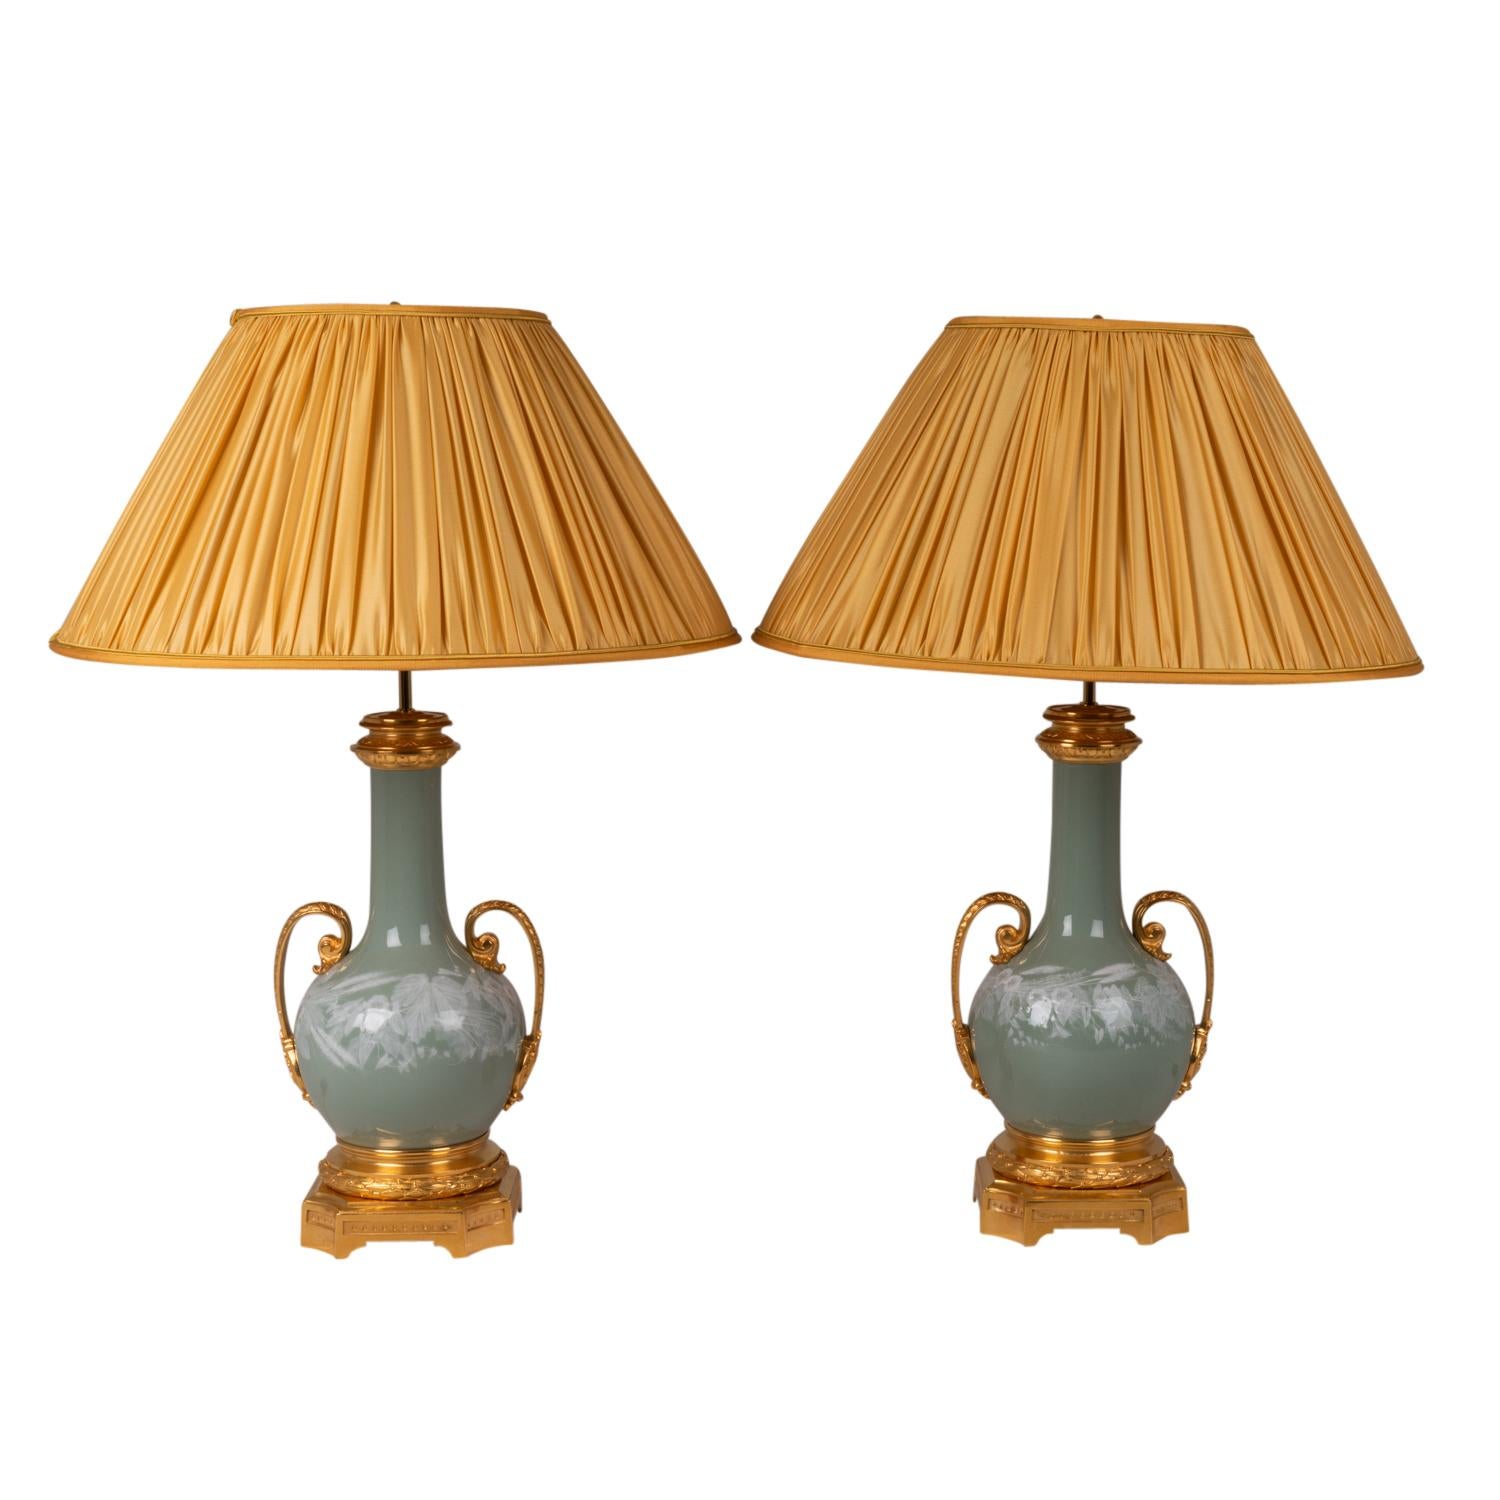 Pair of Celadon porcelain and gilt bronze lamps, adorned with porcelain white flowers, with two handles. Quadripod base with four concave angles.

French work realized circa 1880.

New and functional electrical system. !

The price indicated